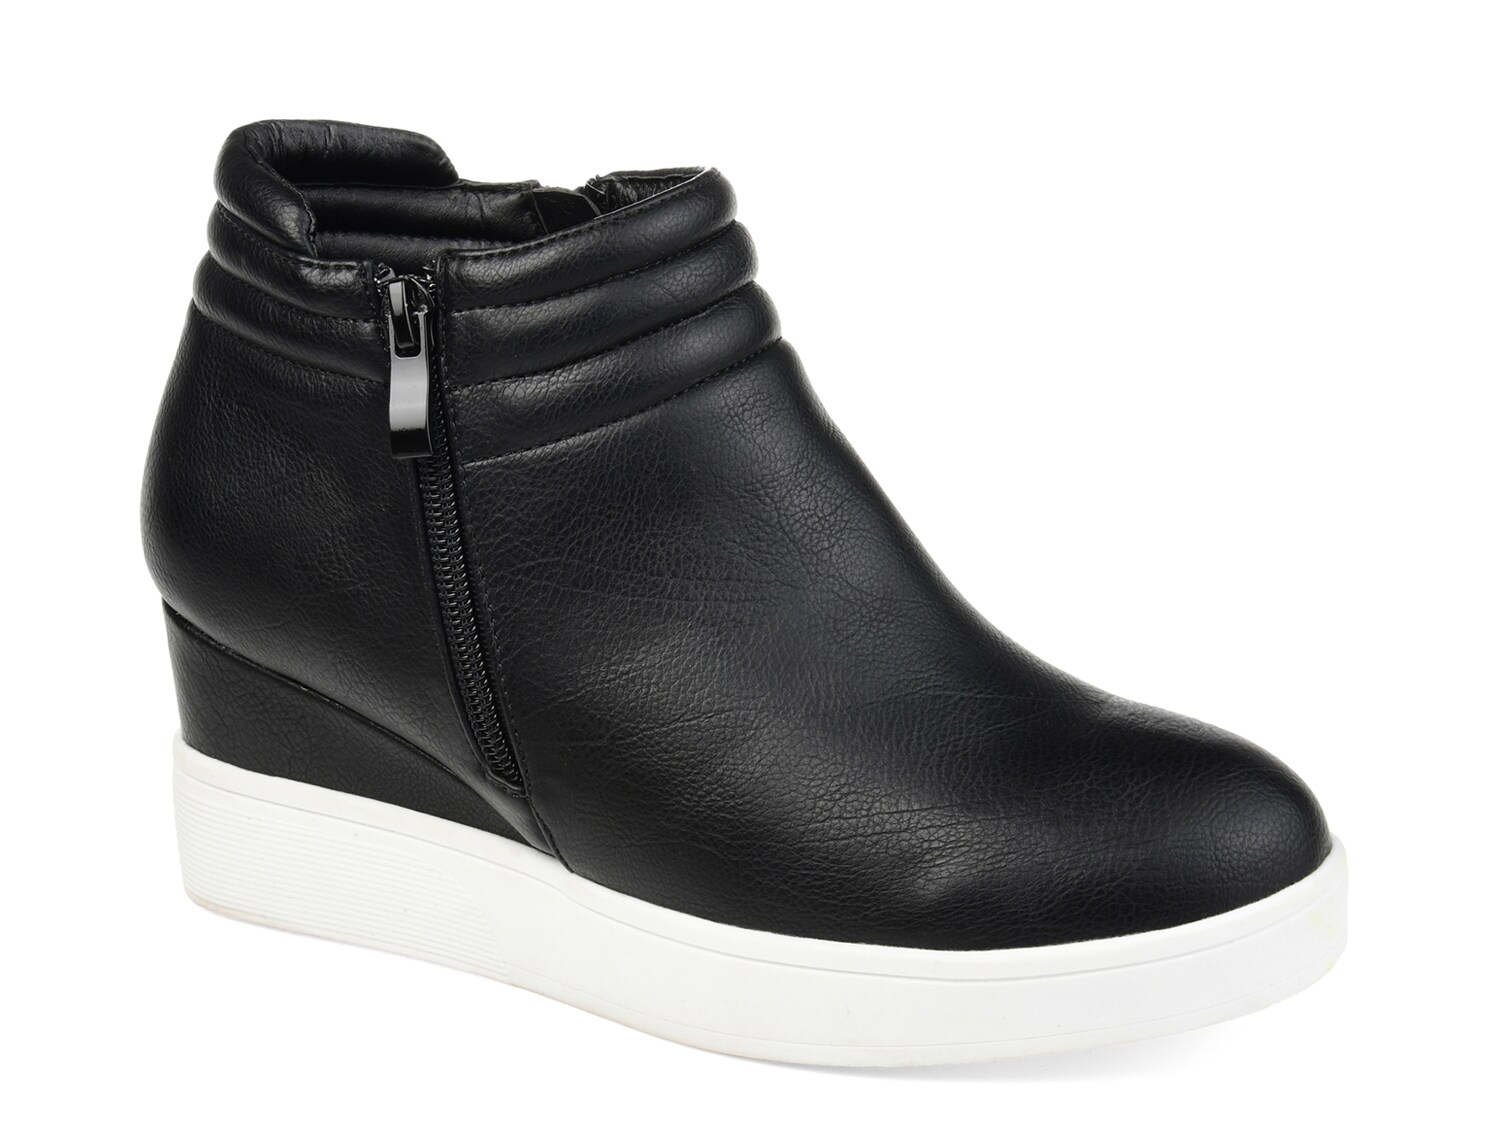 Journee Collection Remmy Wedge Sneaker - Free Shipping | DSW